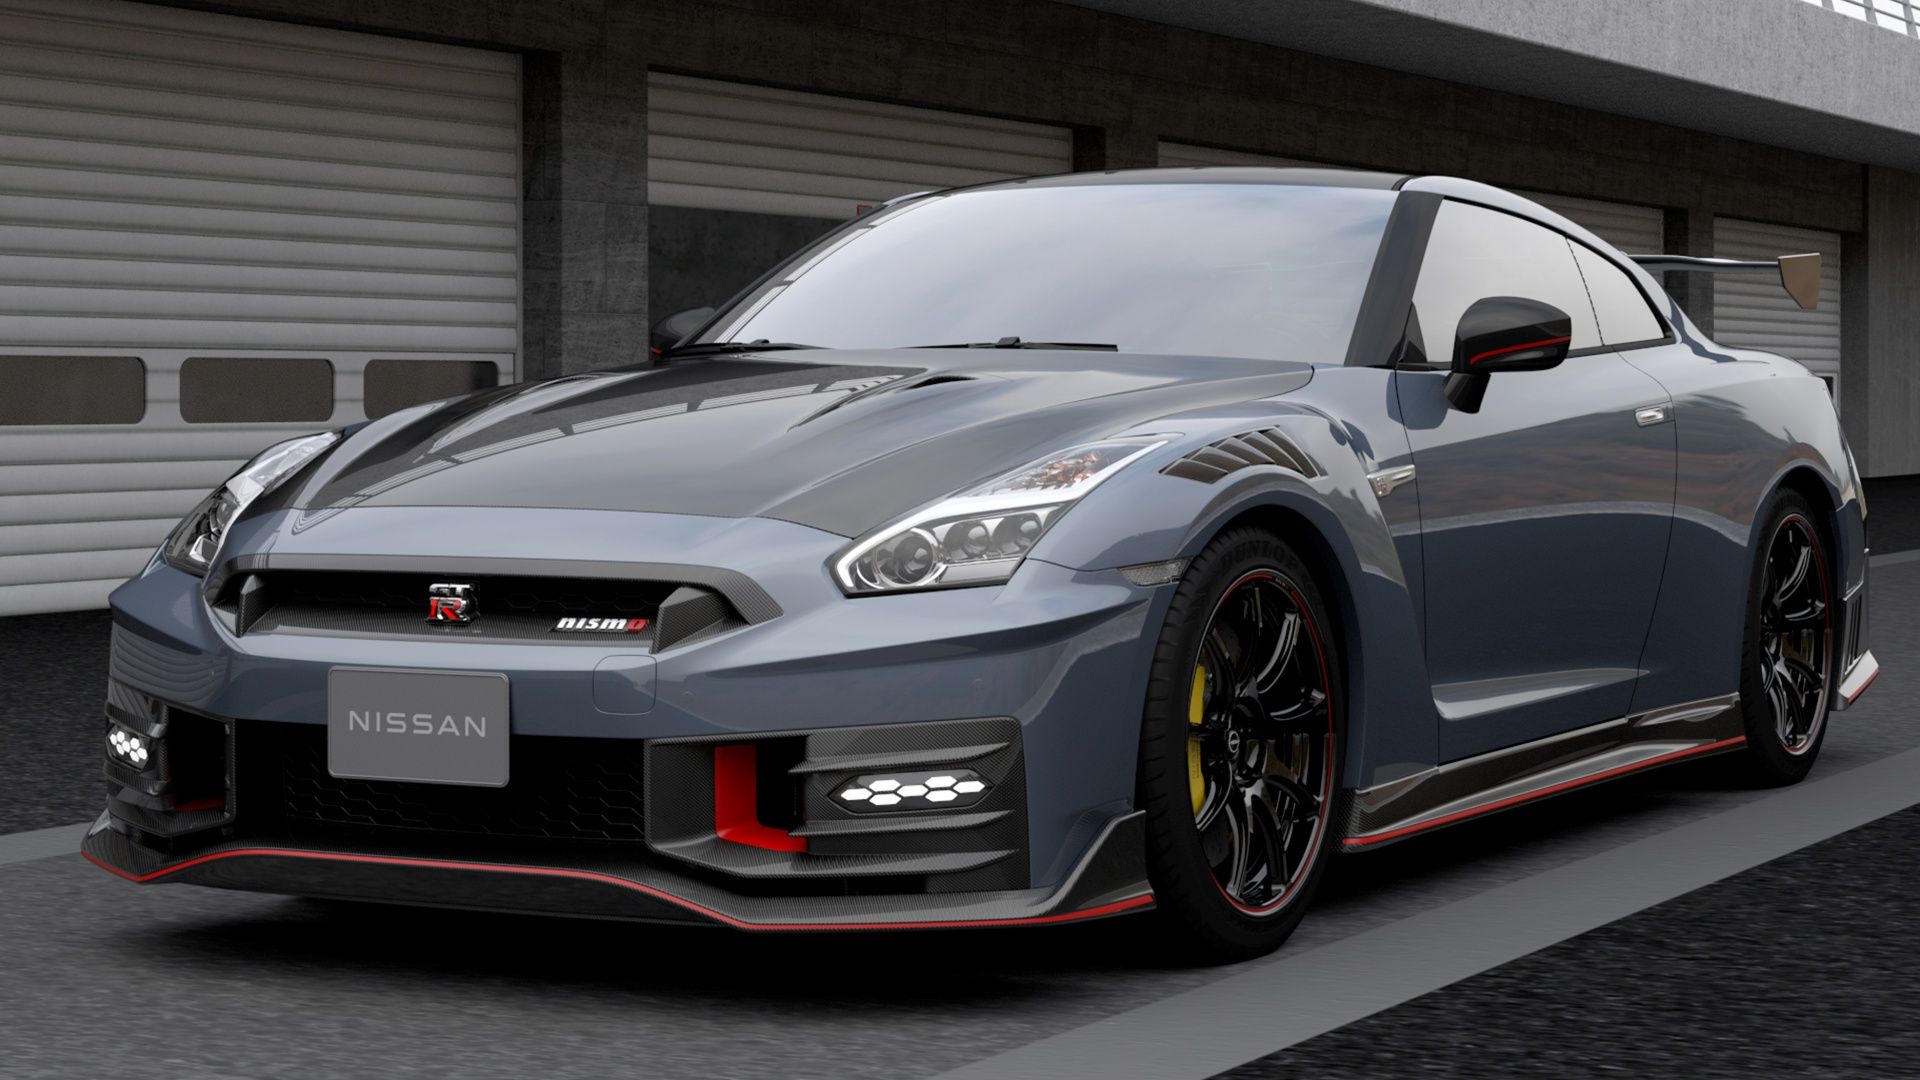 The next generation Nissan GT-R and Z have been confirmed